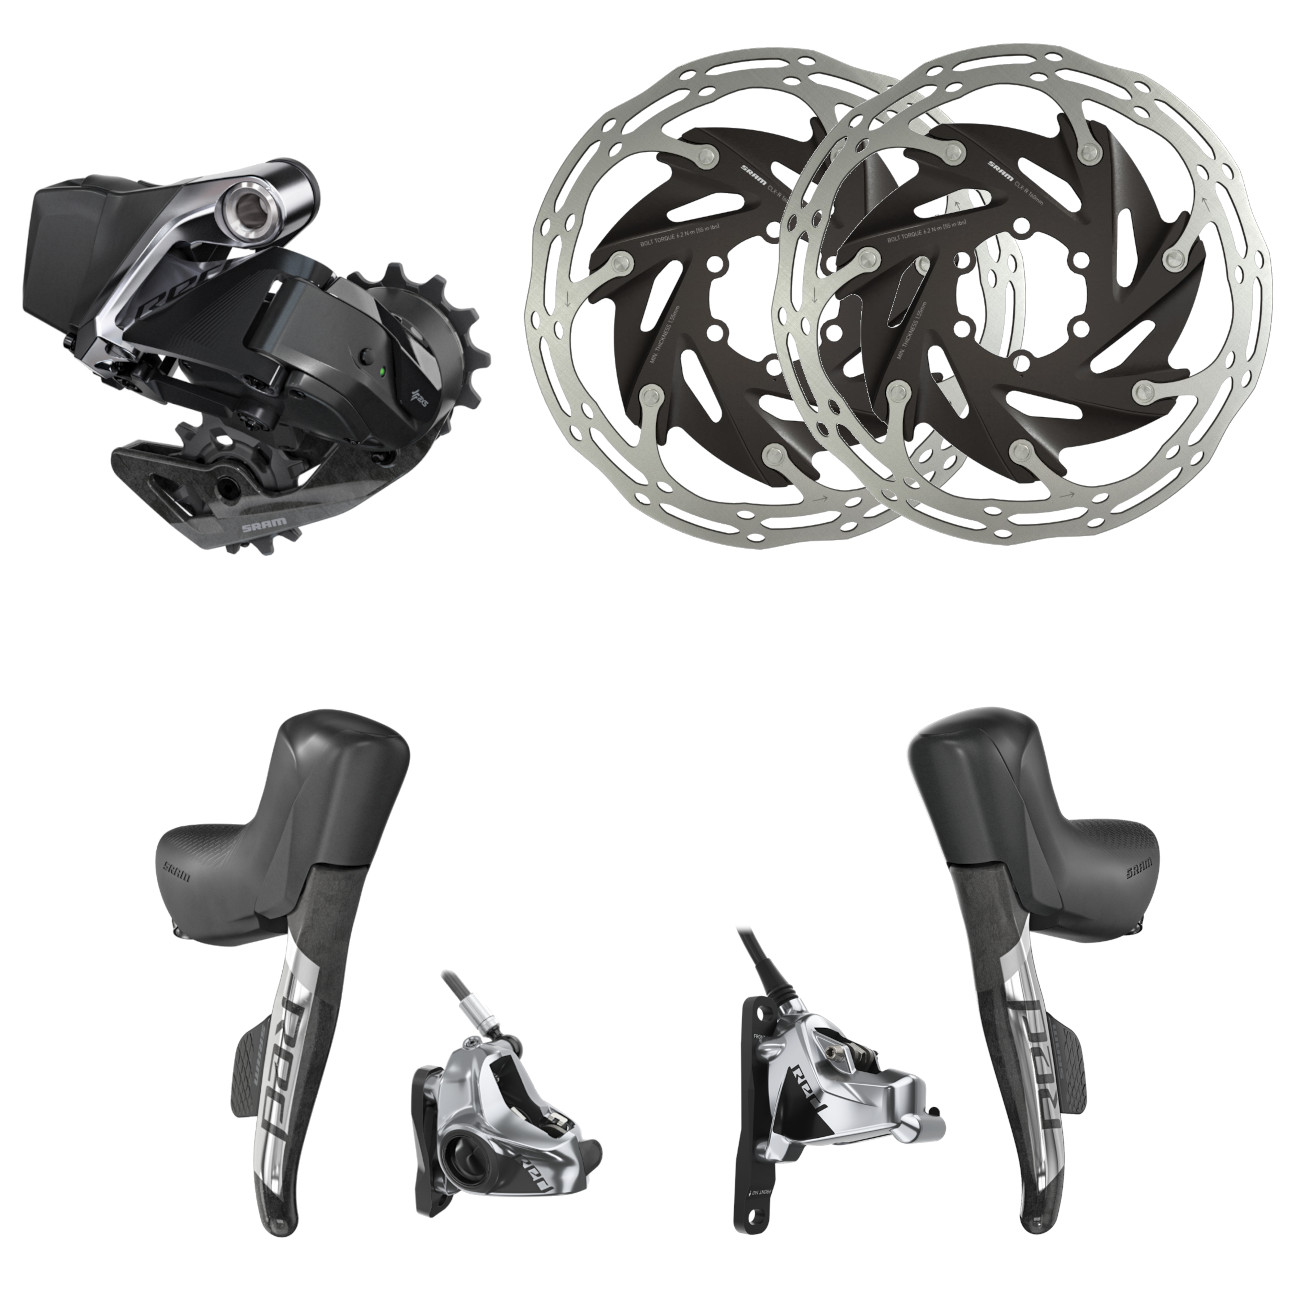 Picture of SRAM RED eTap AXS HRD 1x12 Upgrade Set with Hydraulic Disc Brakes - Flat Mount - 6-Bolt